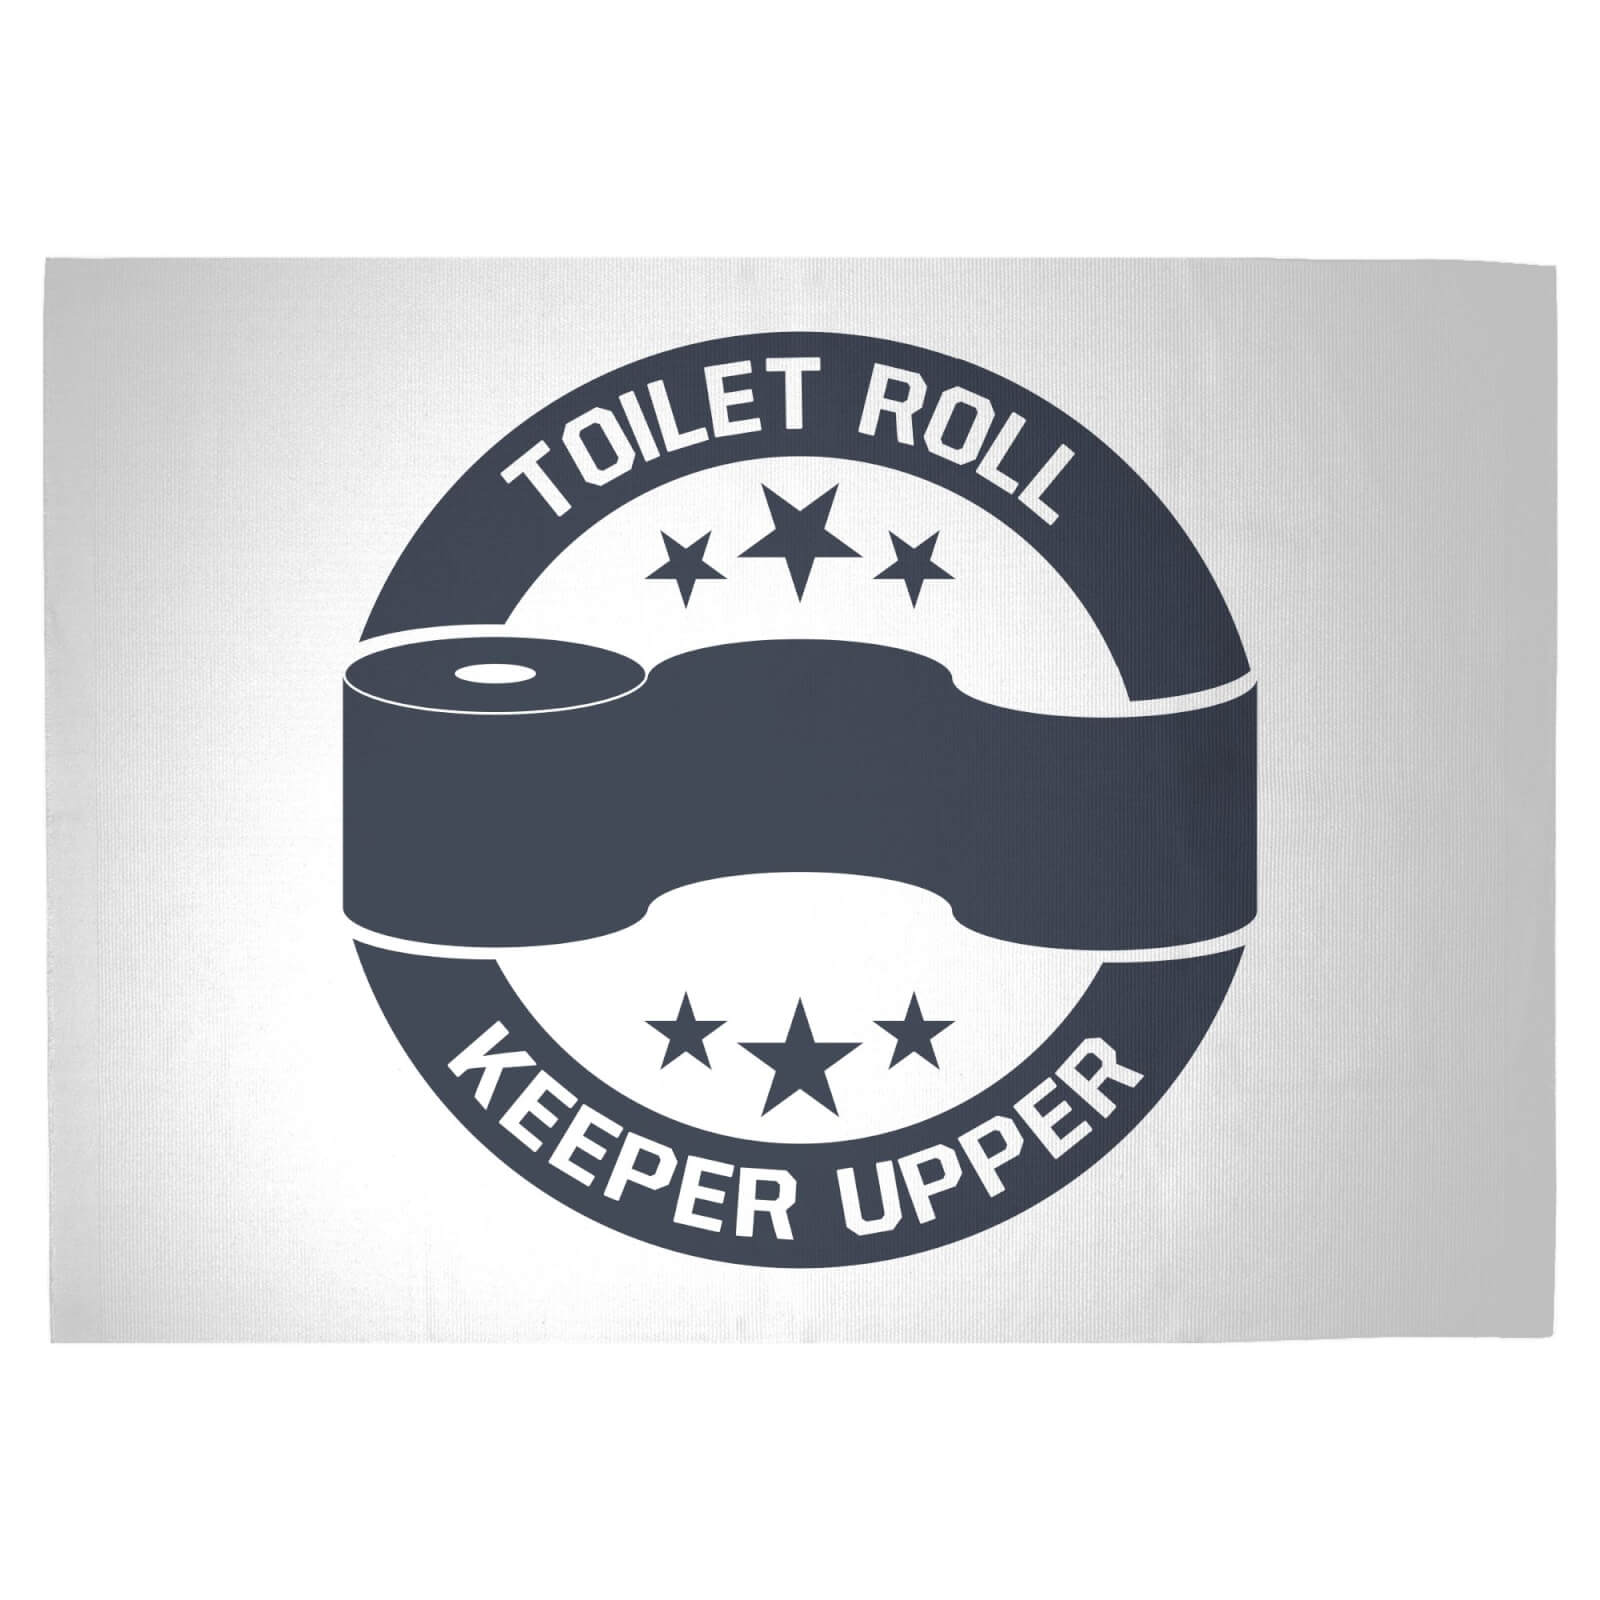 Toilet Roll Keeper Upper Woven Rug - Large